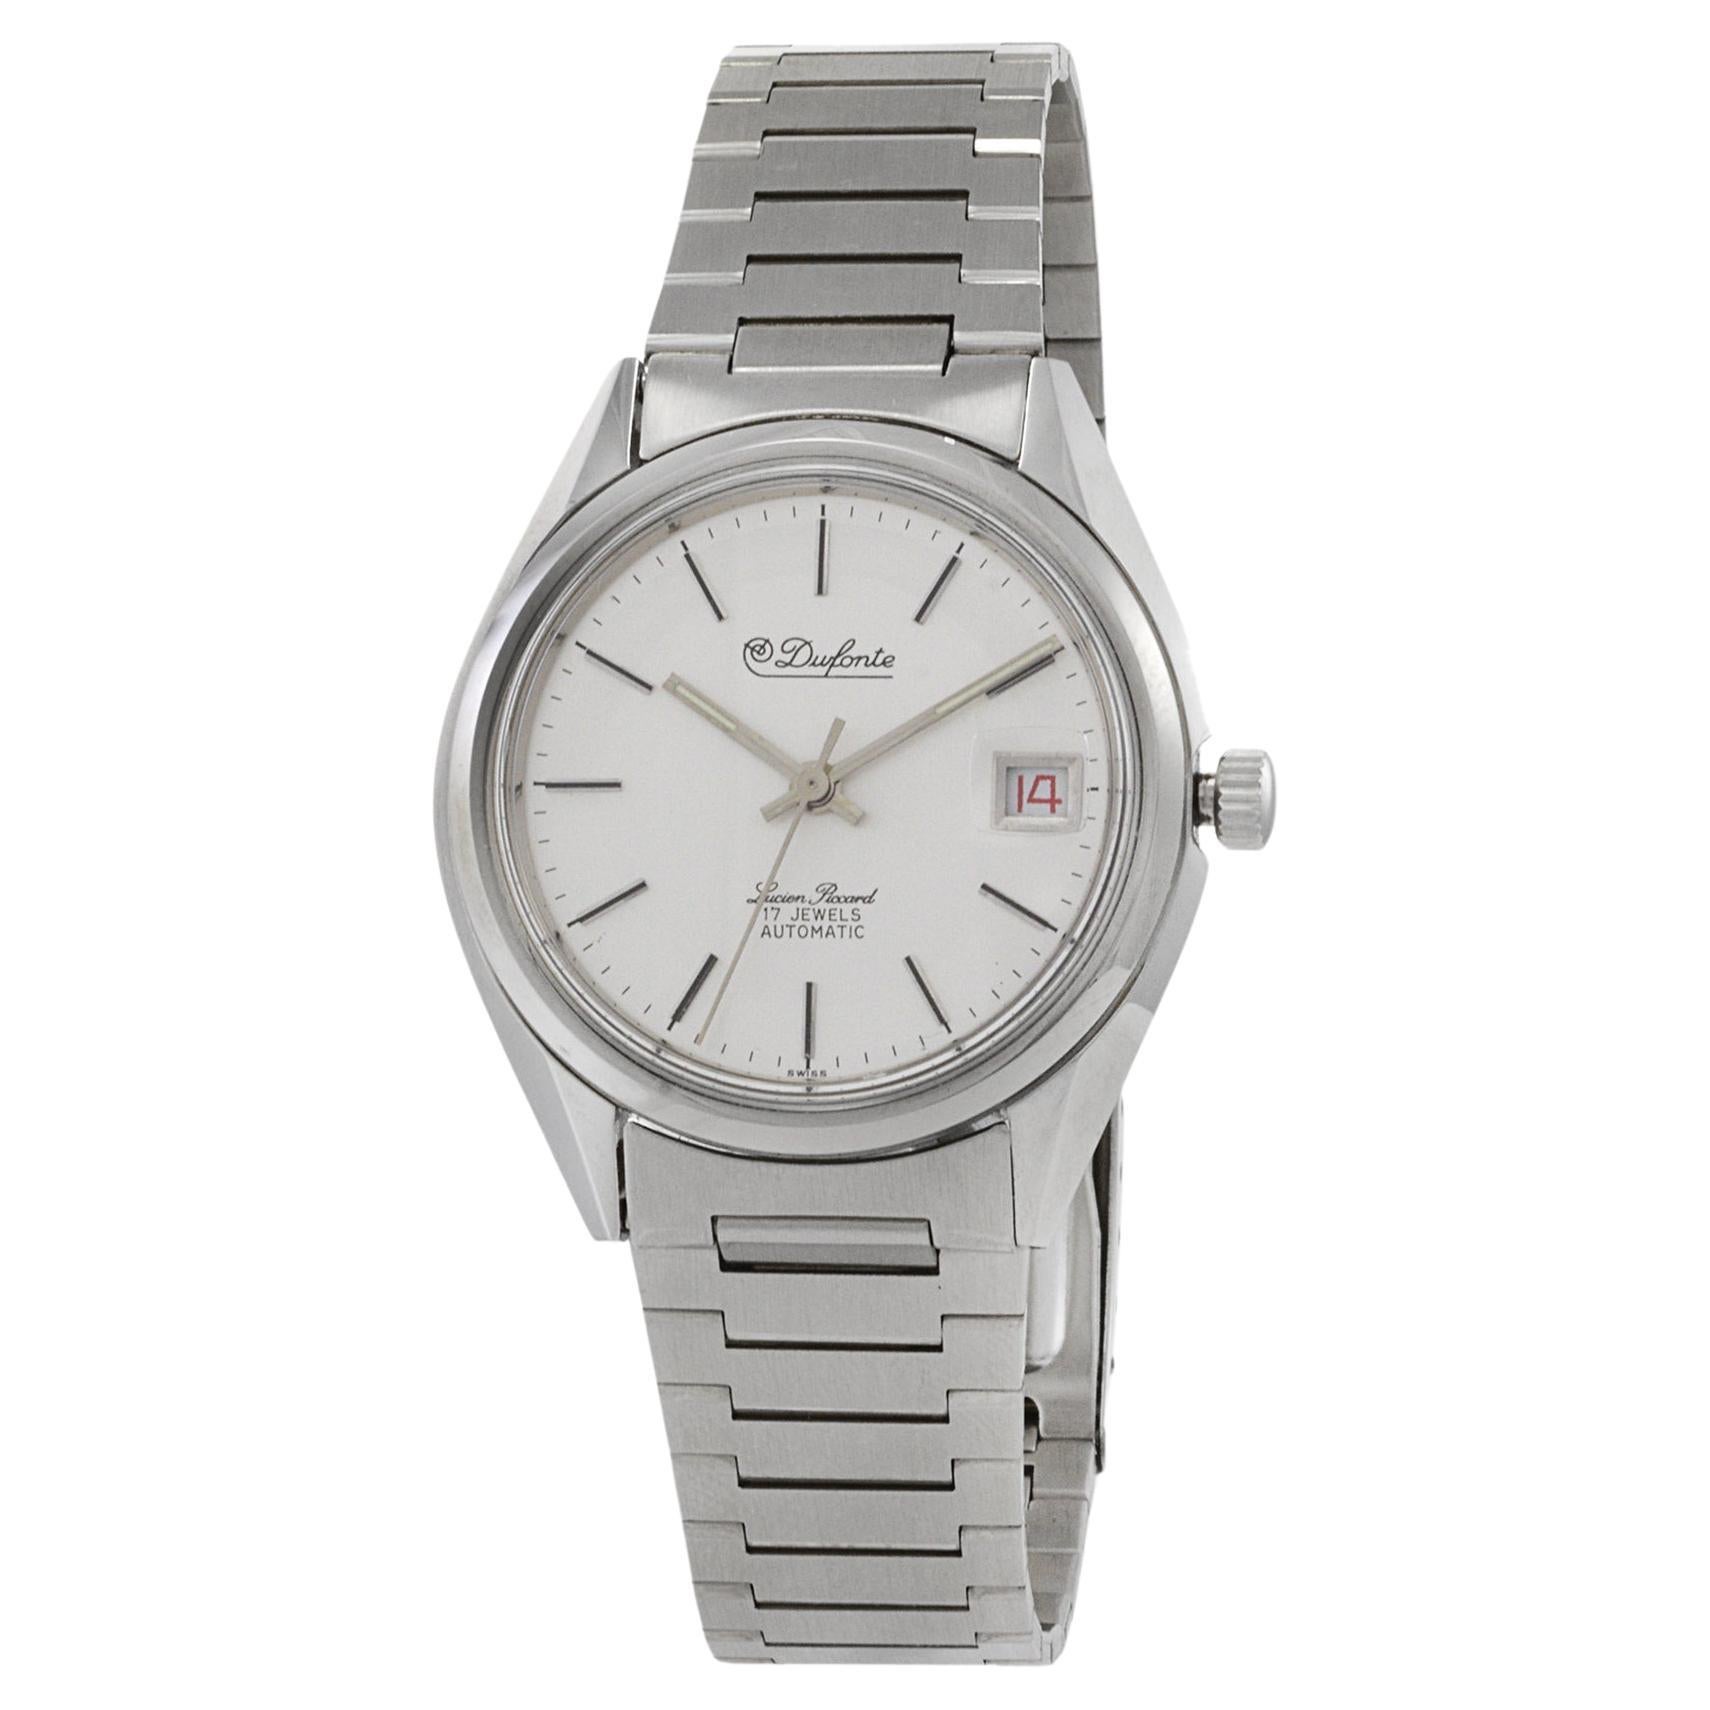 Lucien Piccard Dufonte Calatrava Watch with Date For Sale